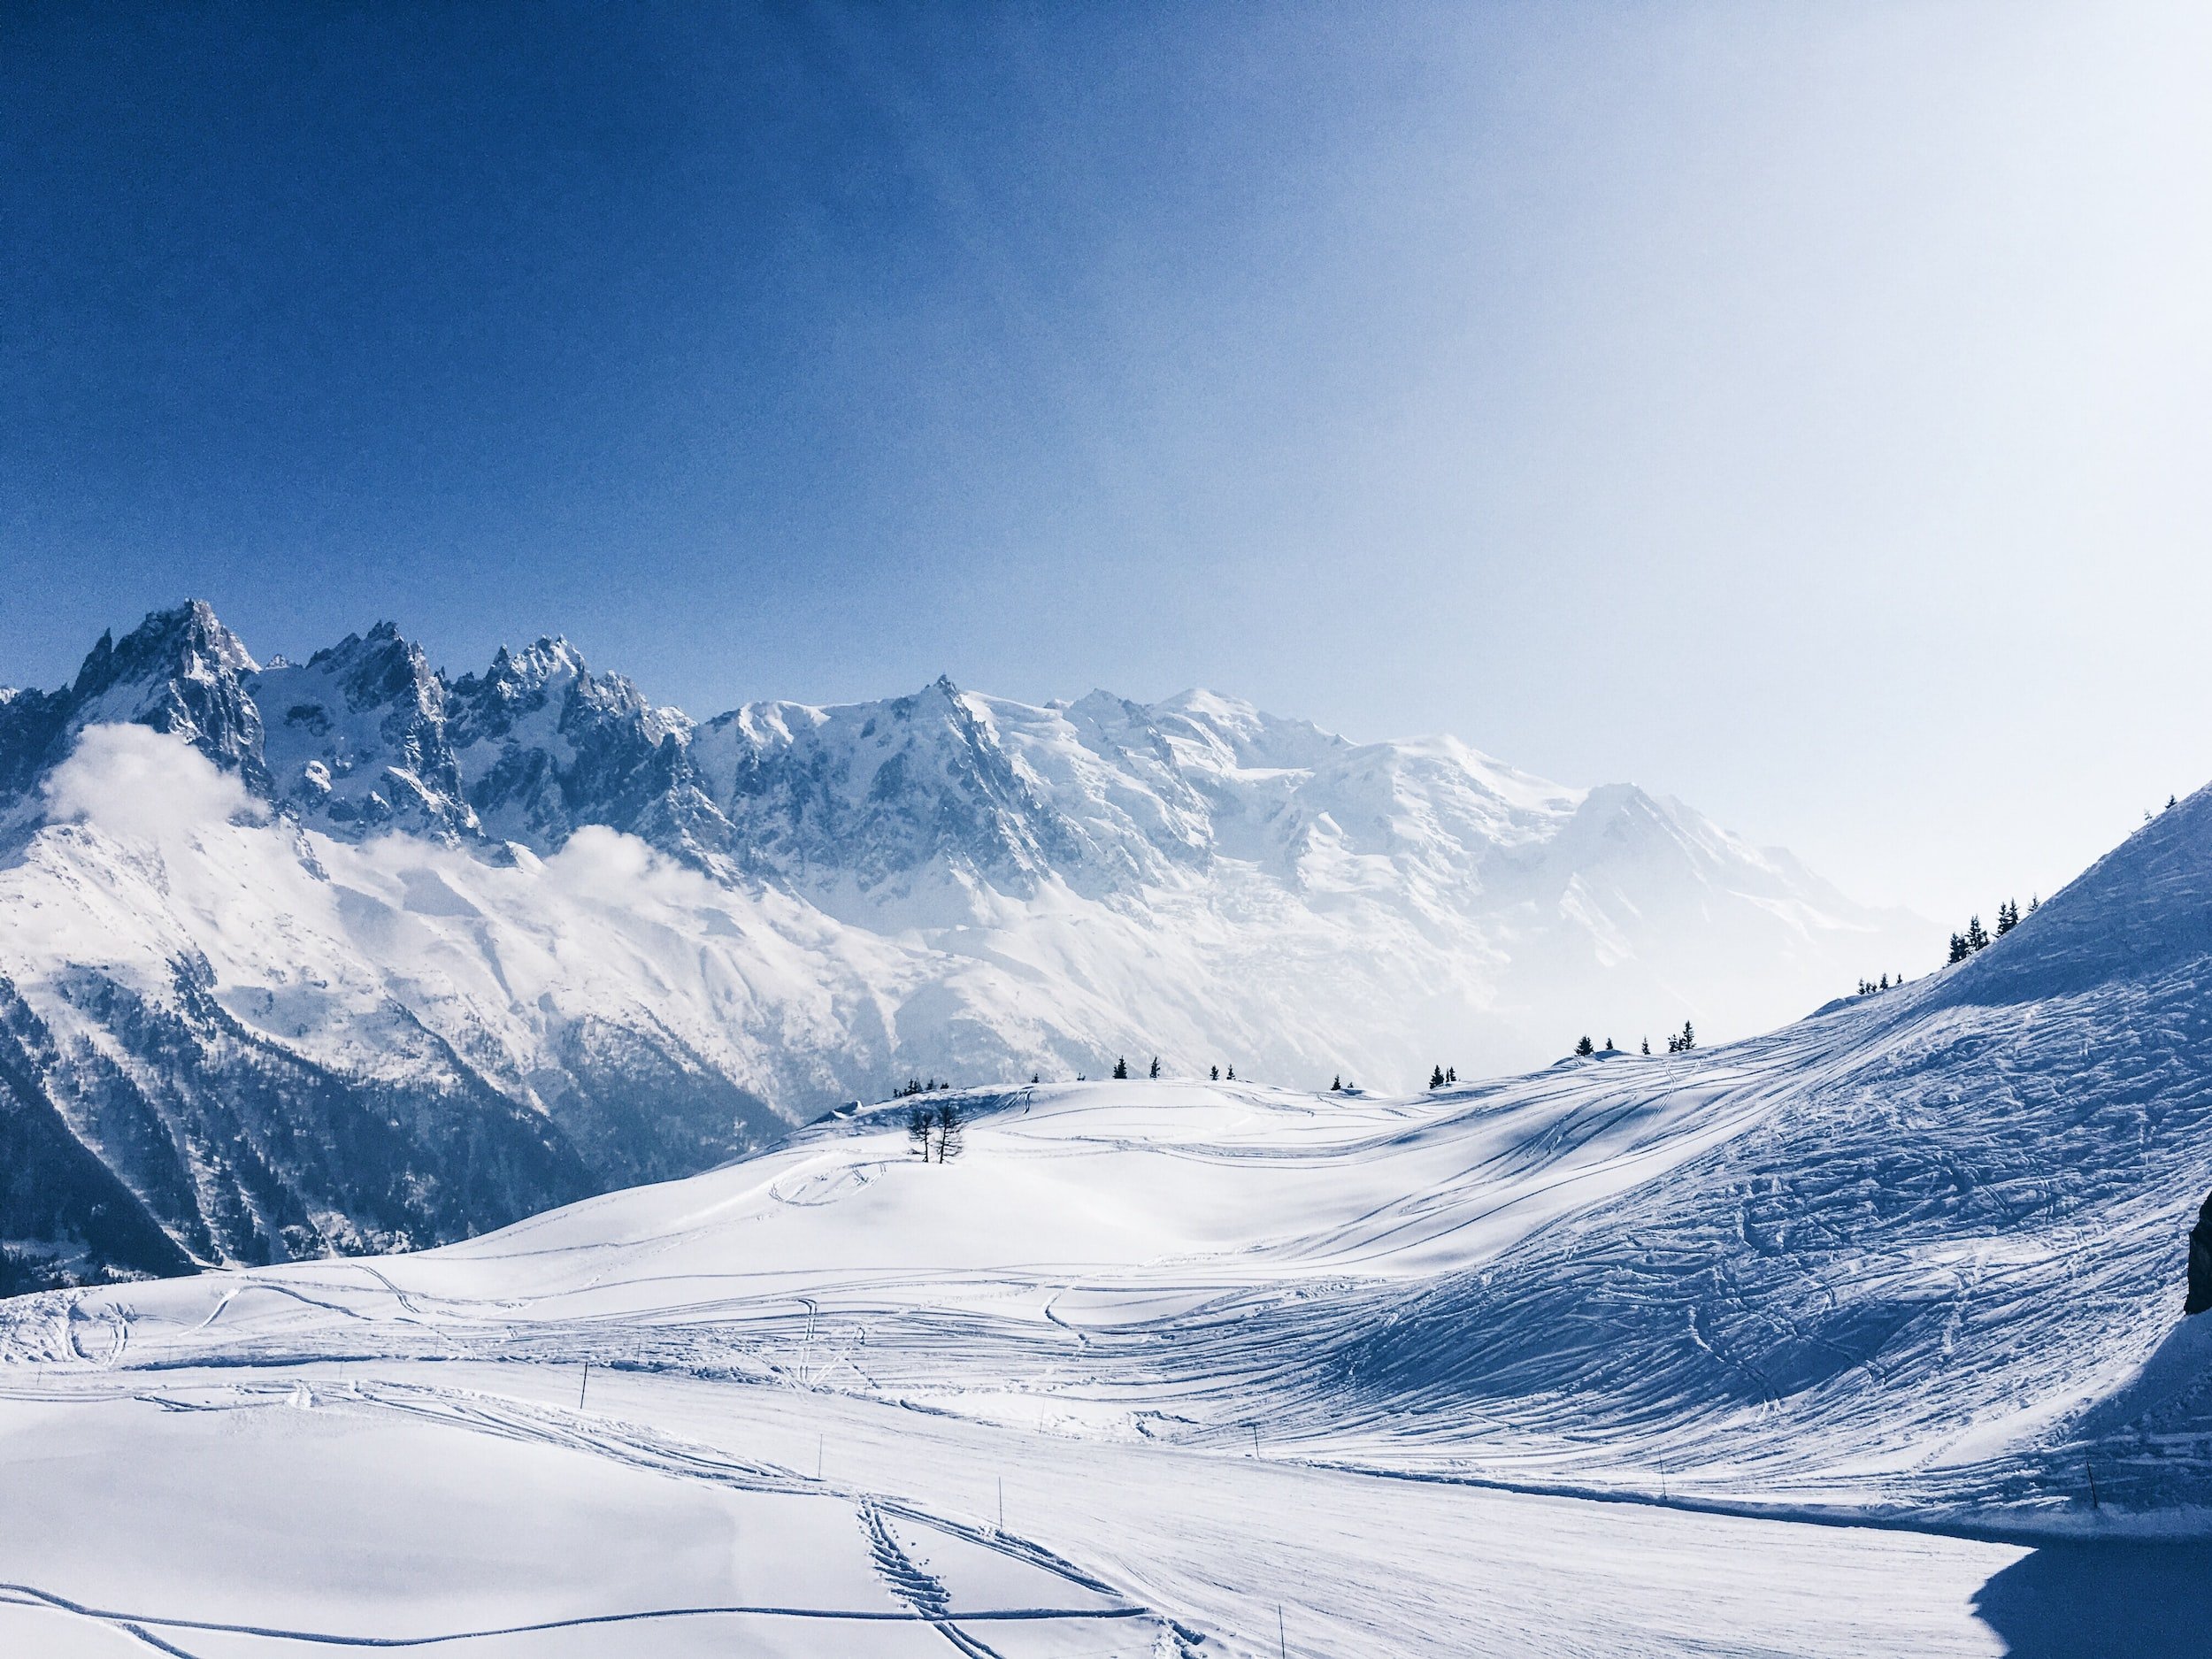 Discover the ski slopes of the Domaine des 3 vallées and Méribel